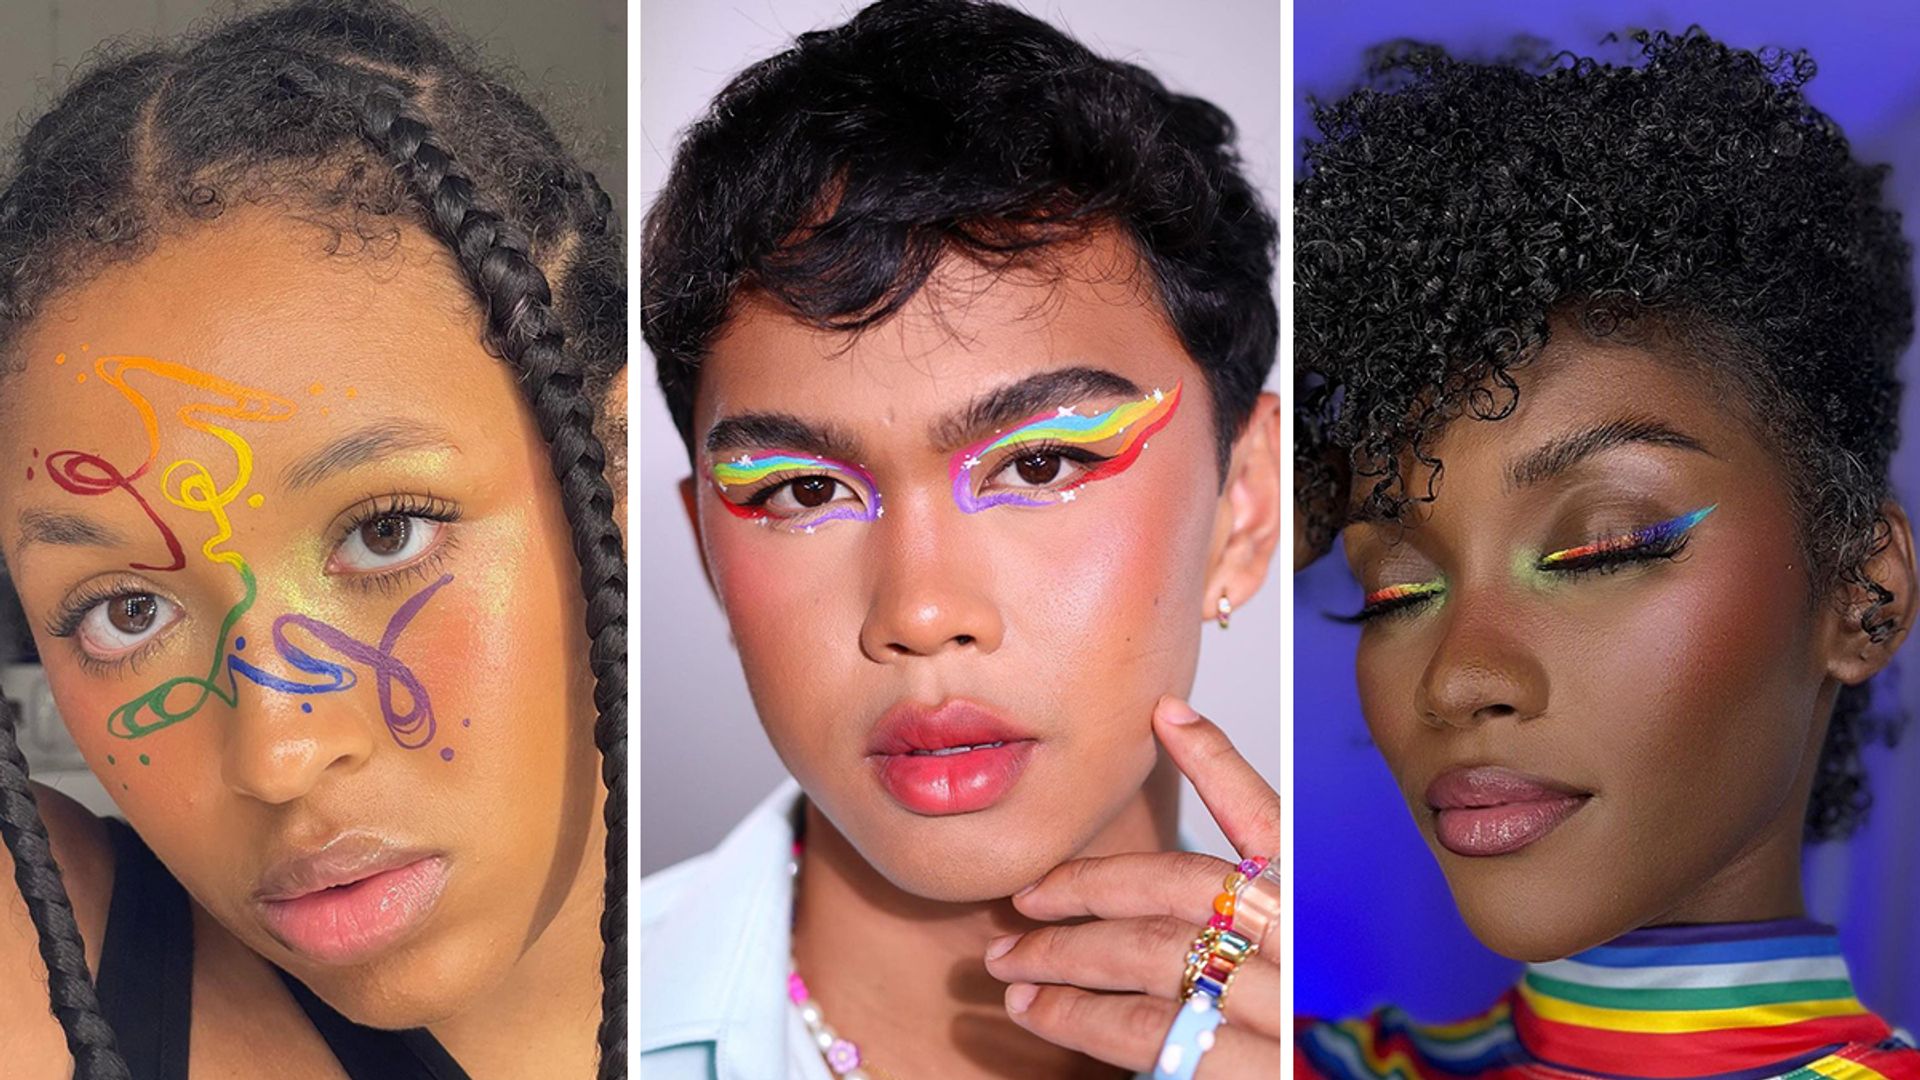 Pride makeup. Look one: rainbow squiggle line work over the centre of the face. Look two: soft rainbow graphic liner. Look three: sharp cat-eye liner. 